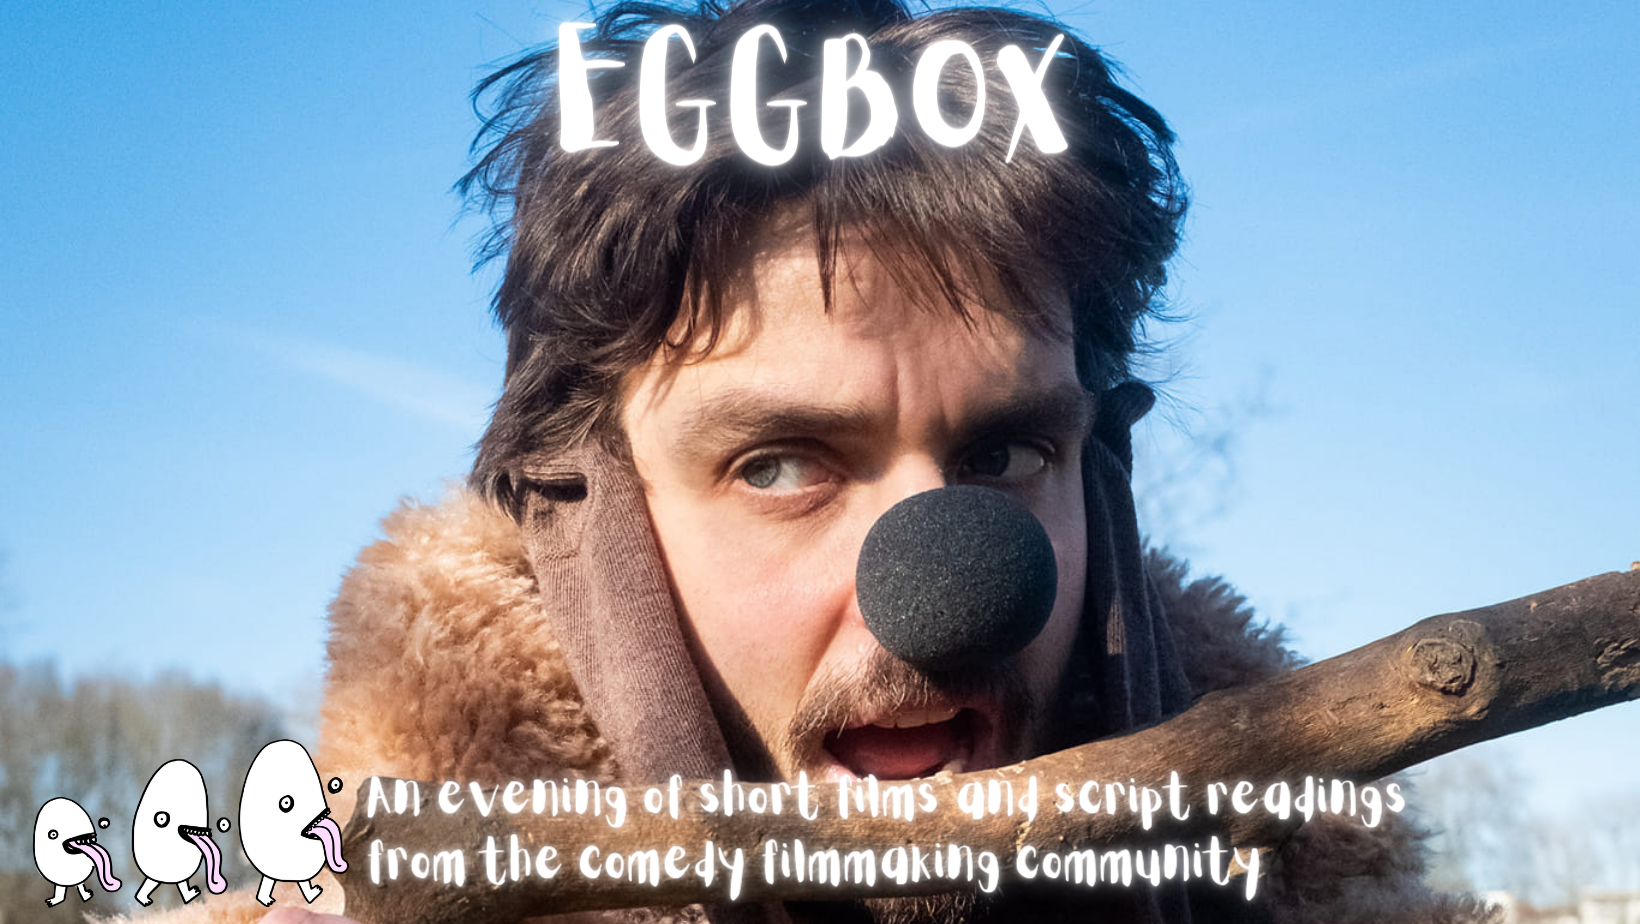 Eggbox: A Night Of Comedy Short Films And Script Readings